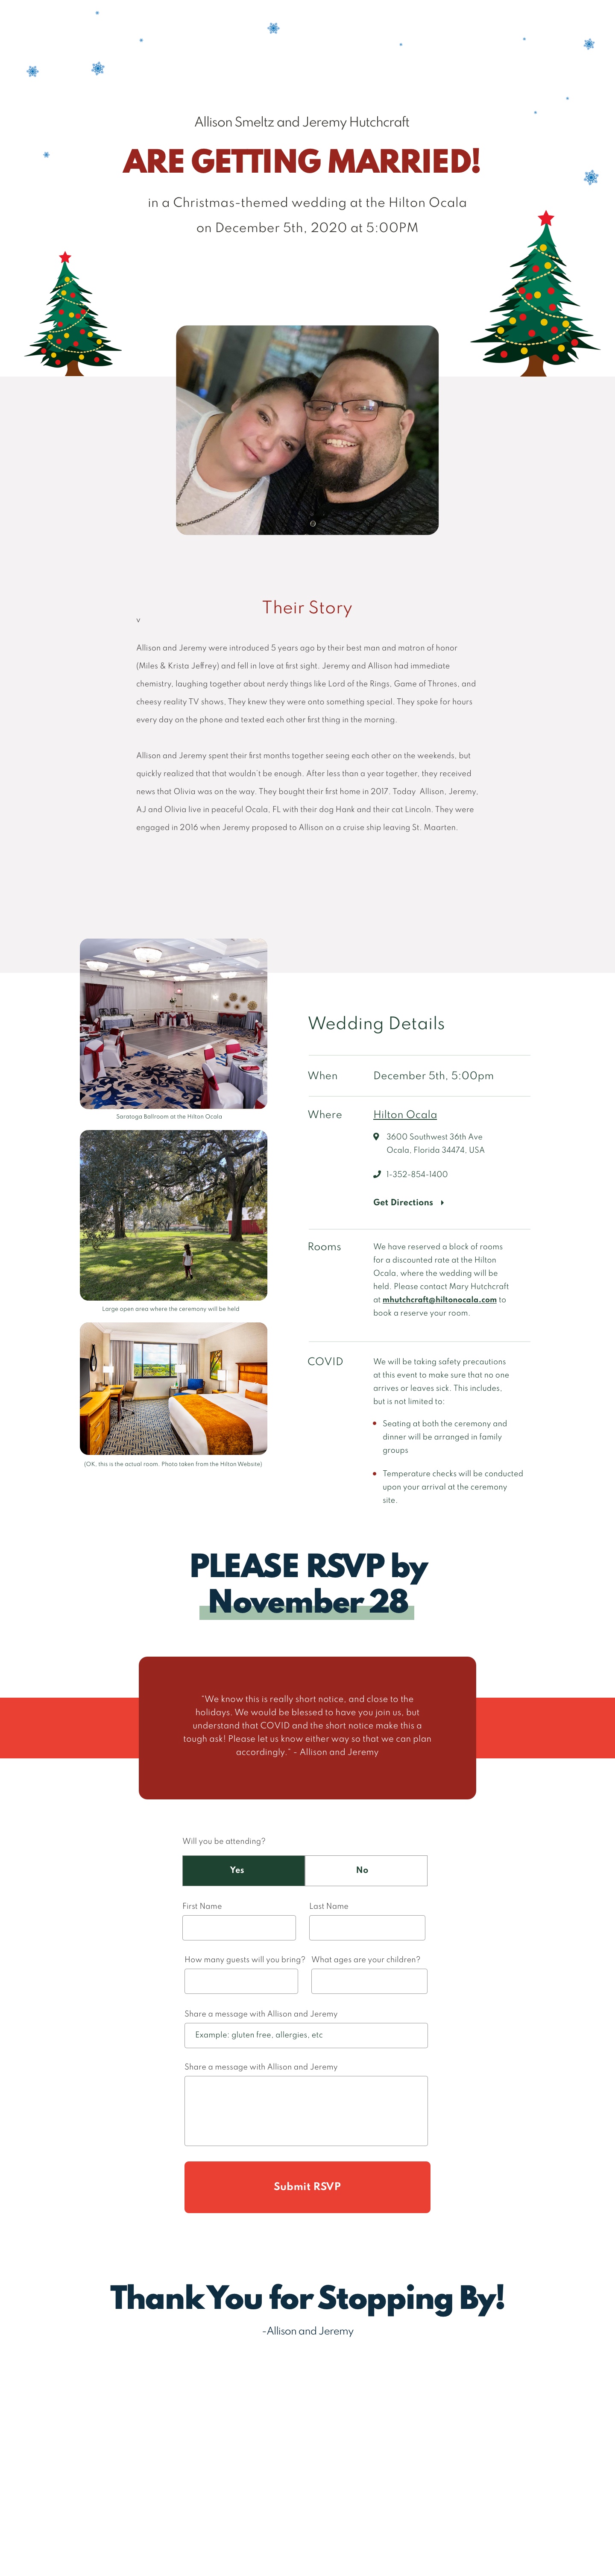 high res image of the our wedding website